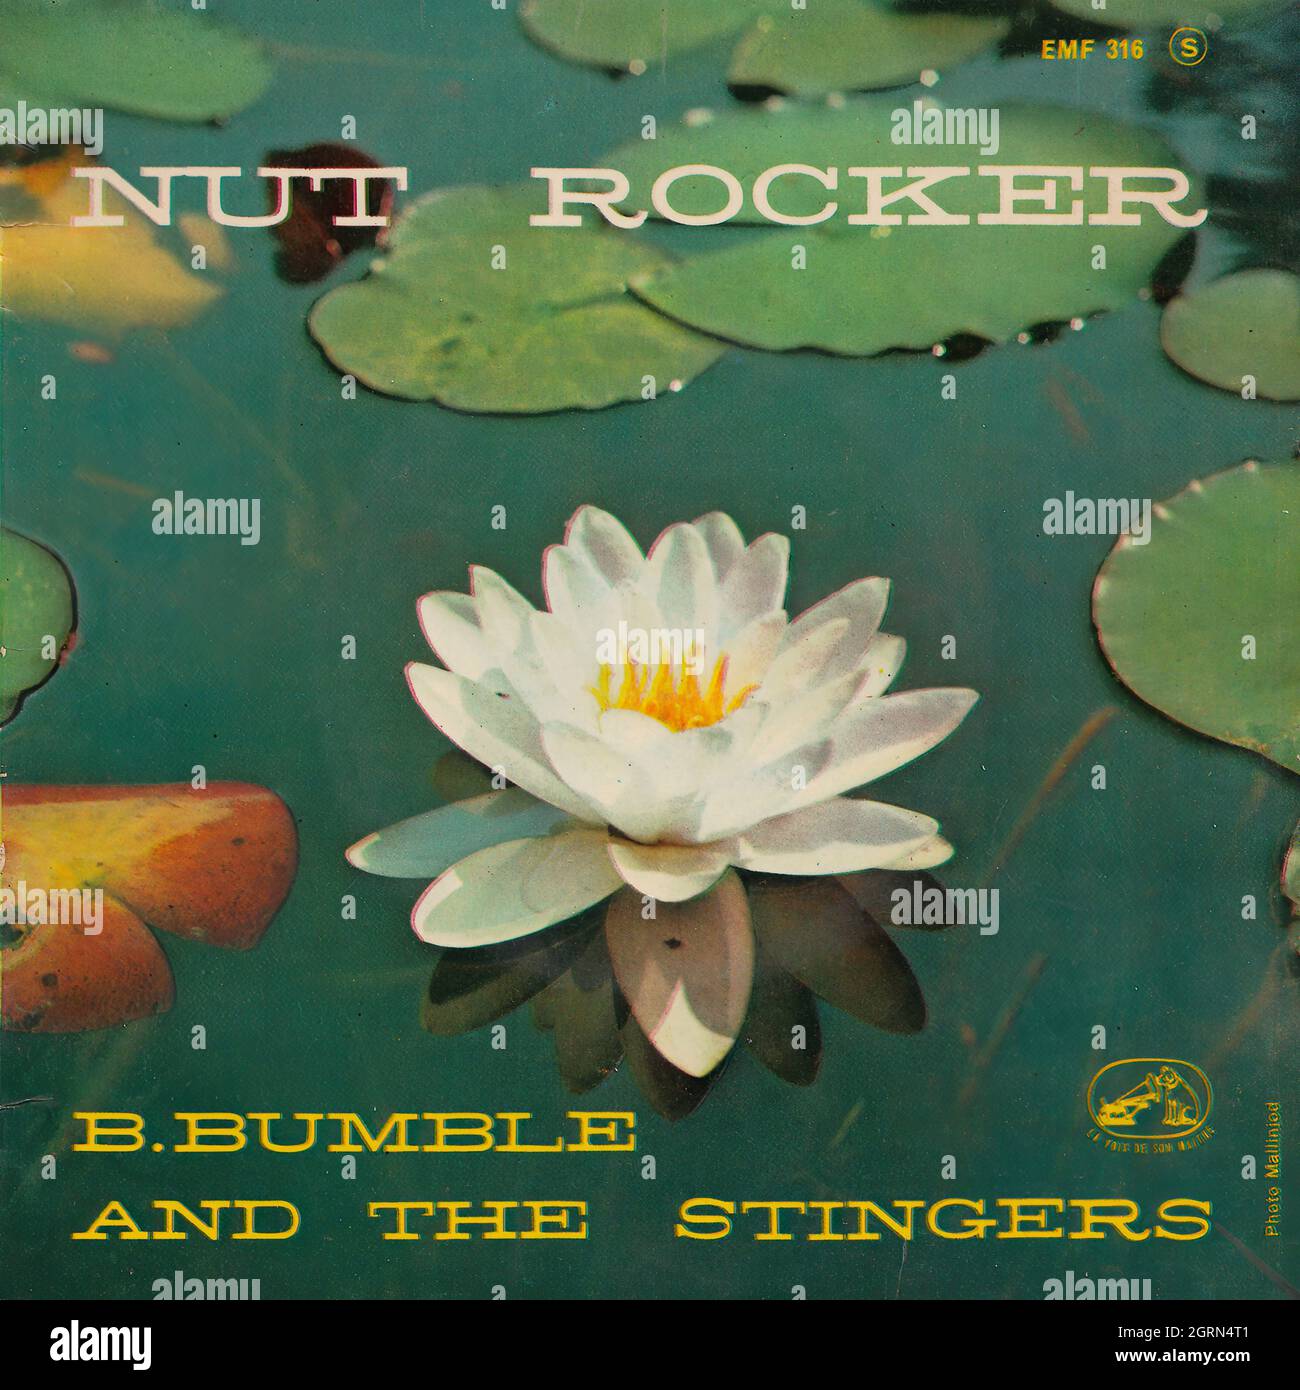 B.Bumble and The Stingers - Nut Rocker EP - Vintage Vinyl Record Cover Stockfoto